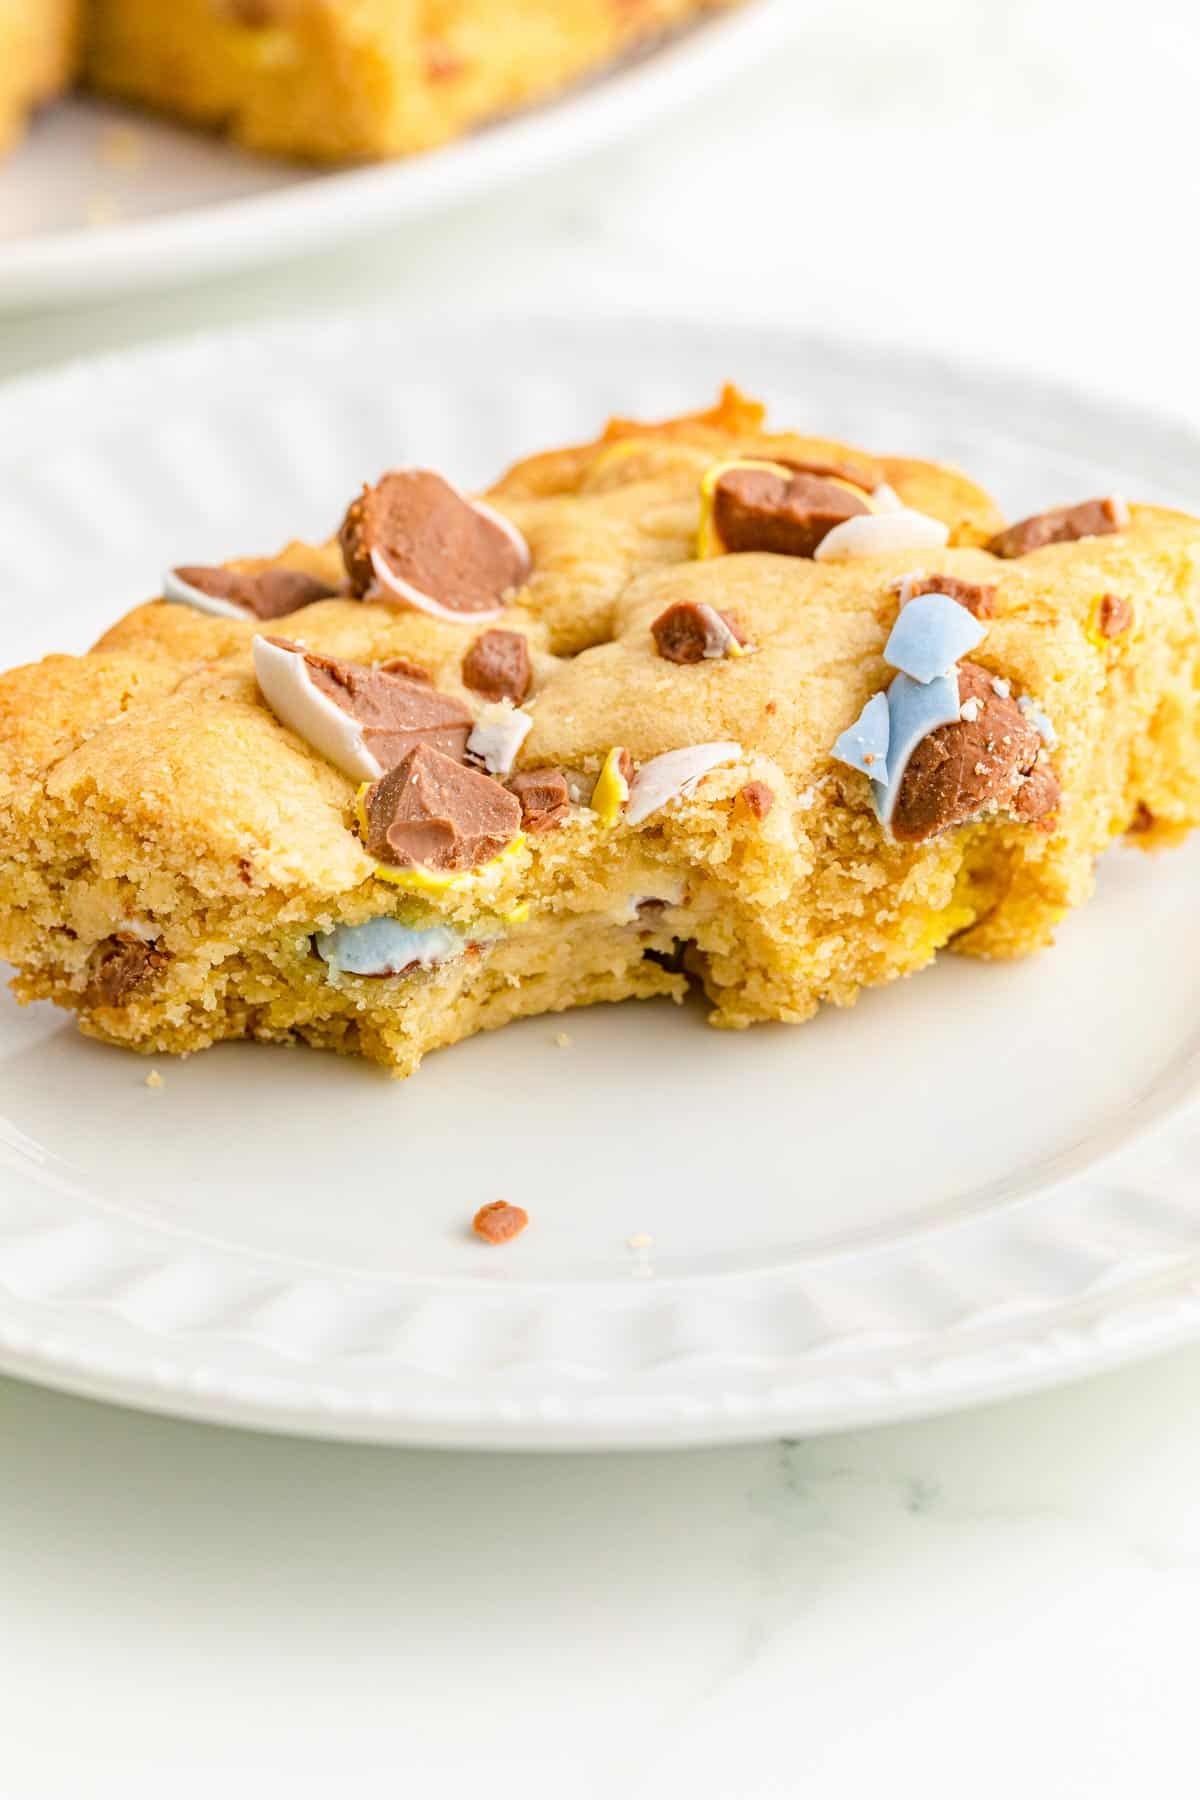 A mini egg cookie bar on a plate with a bite taken out.